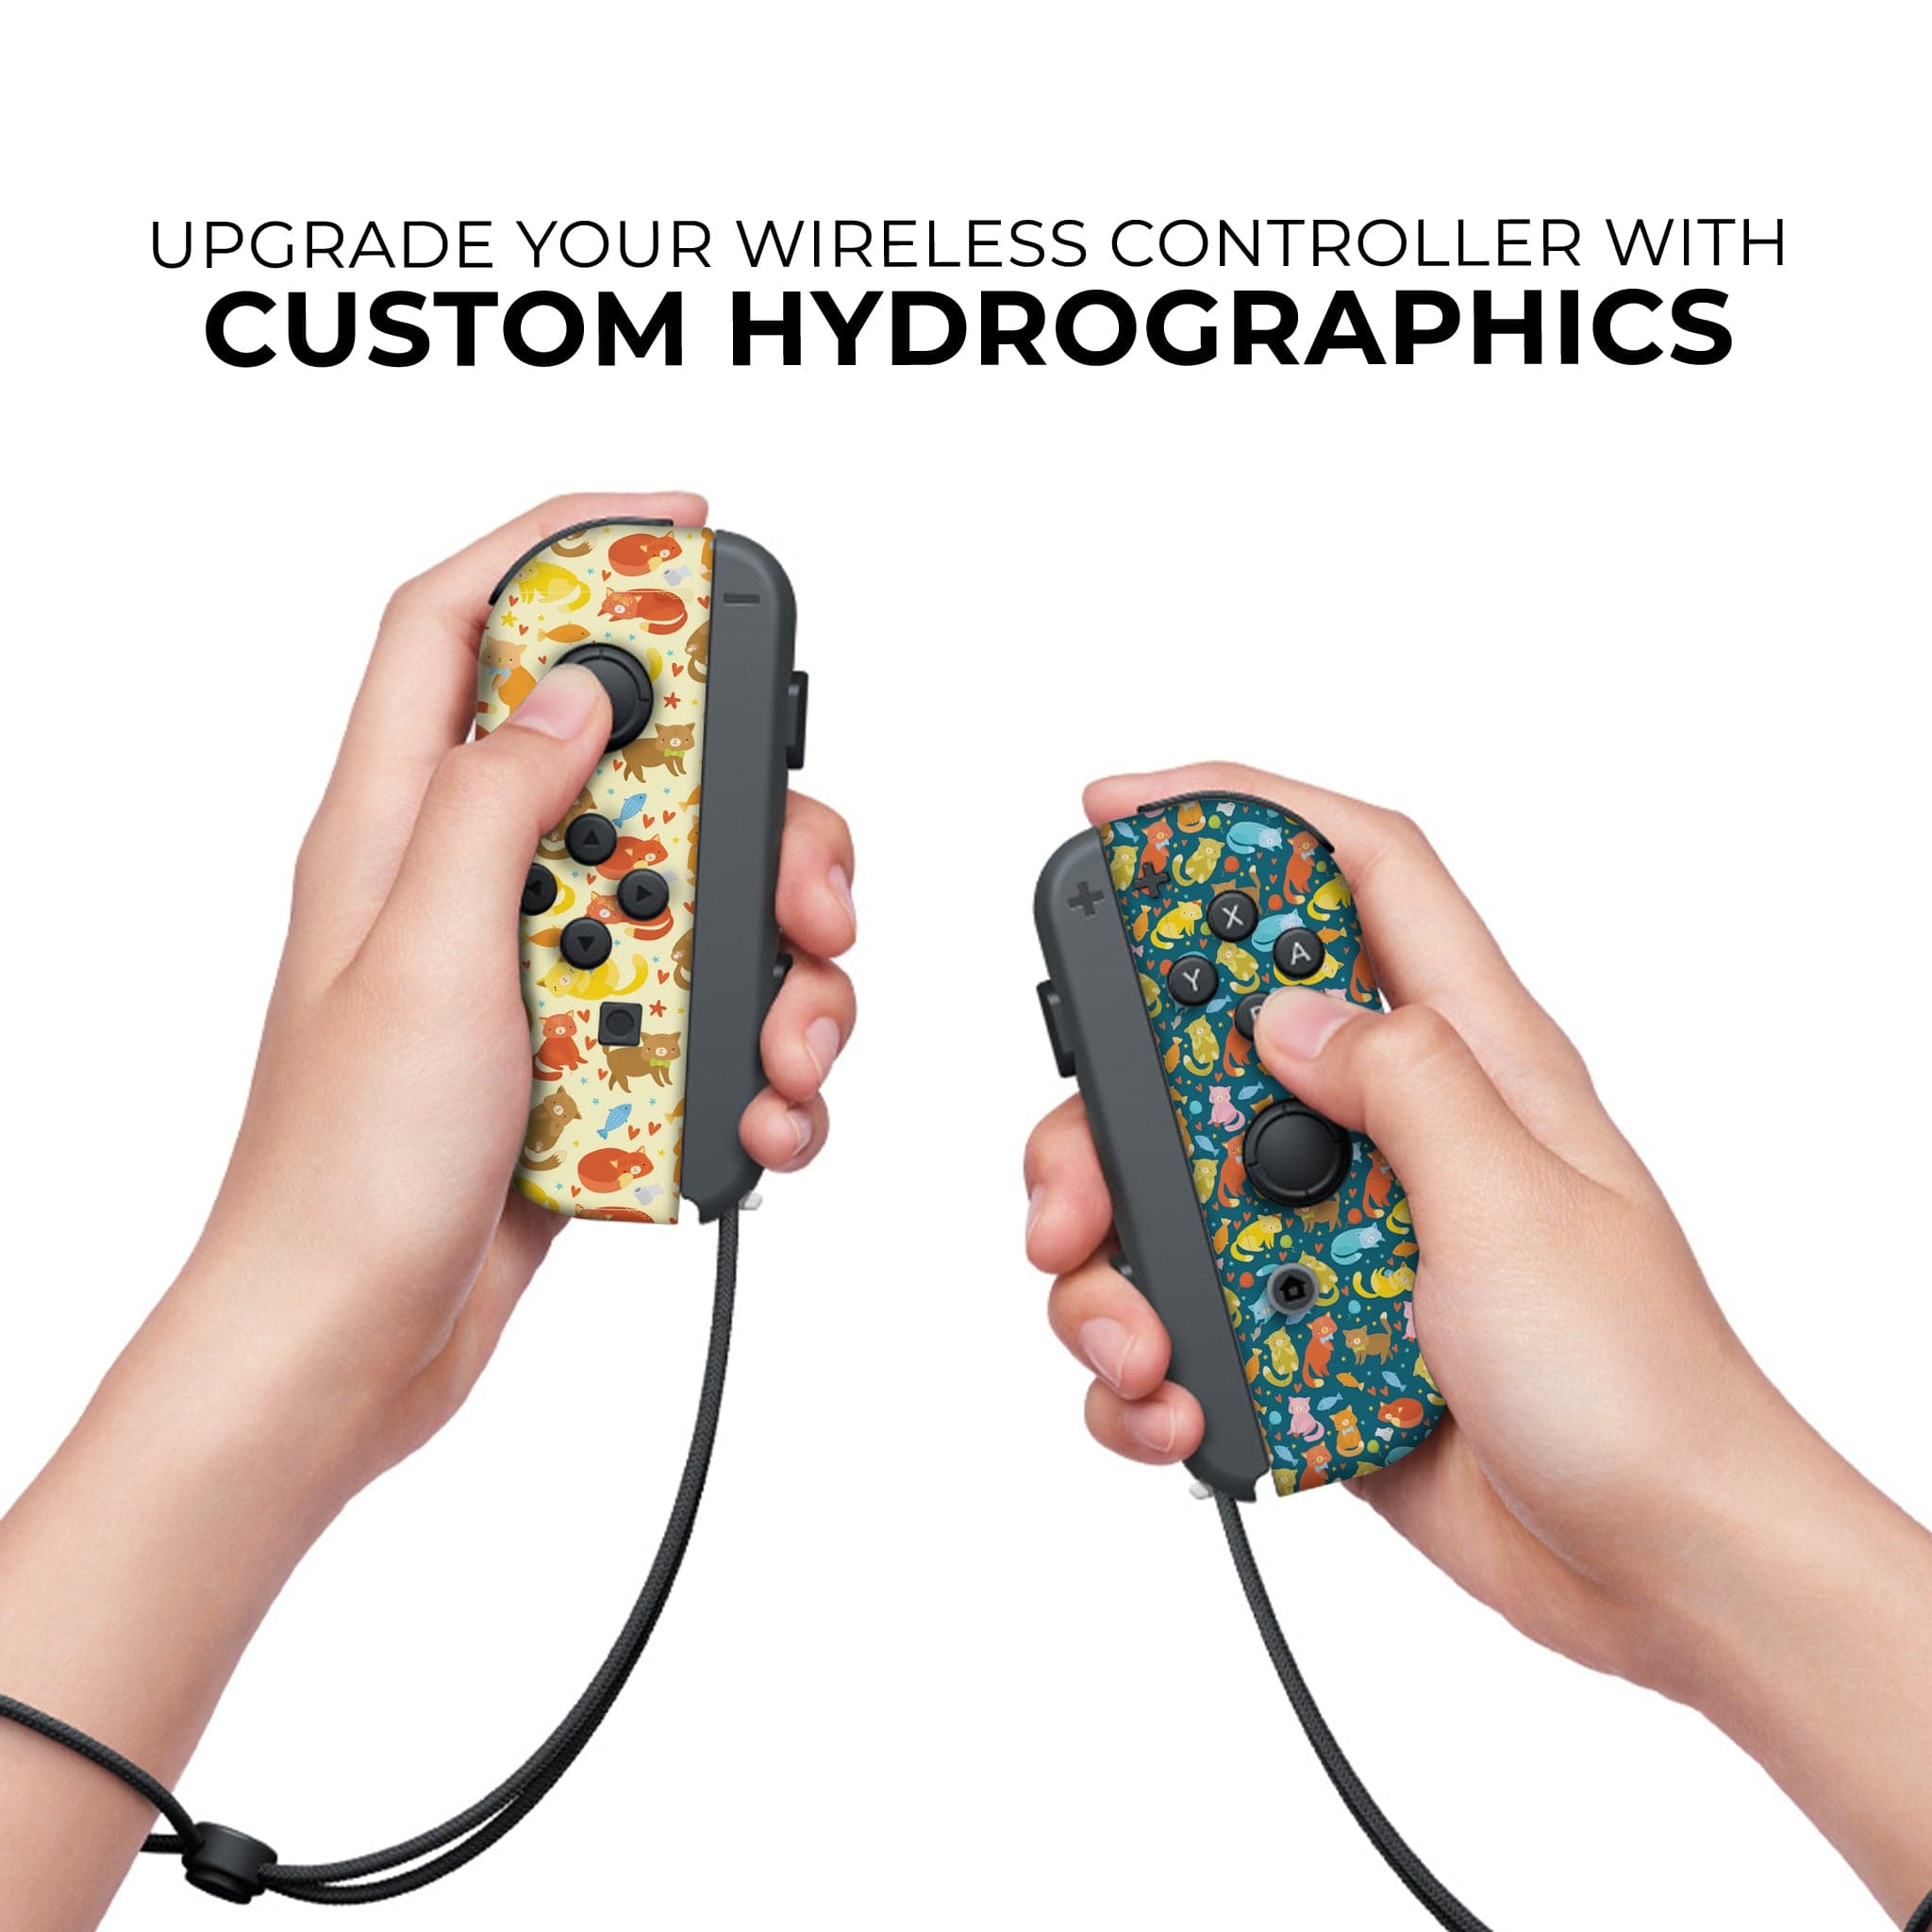 International Cat Day Inspired Nintendo Switch Joy-Con Left and Right Switch Controllers by Nintendo